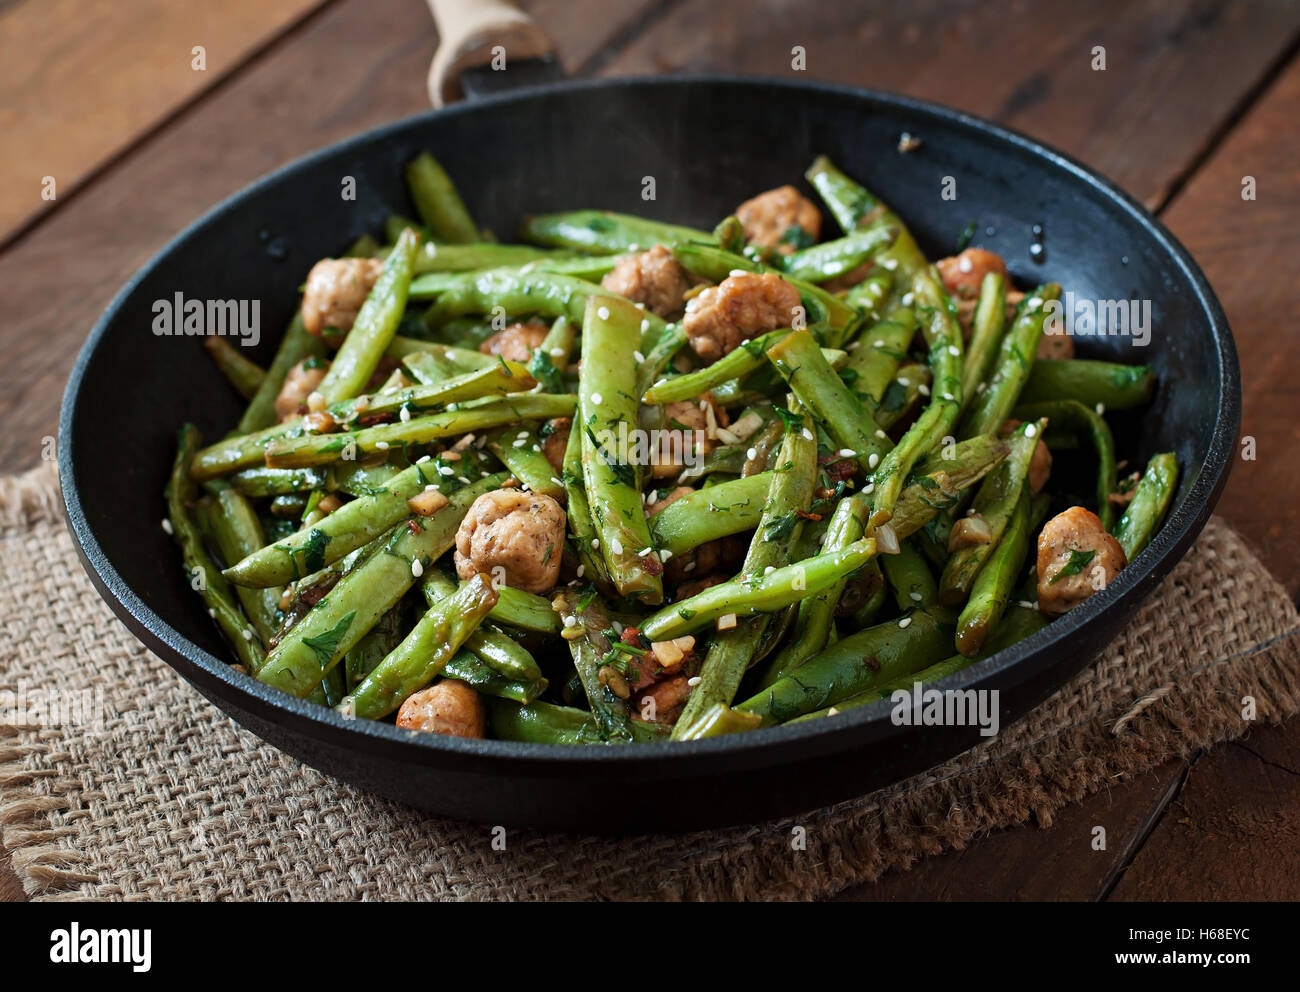 Green beans fried with chicken meatballs and garlic Asian style. Stock Photo